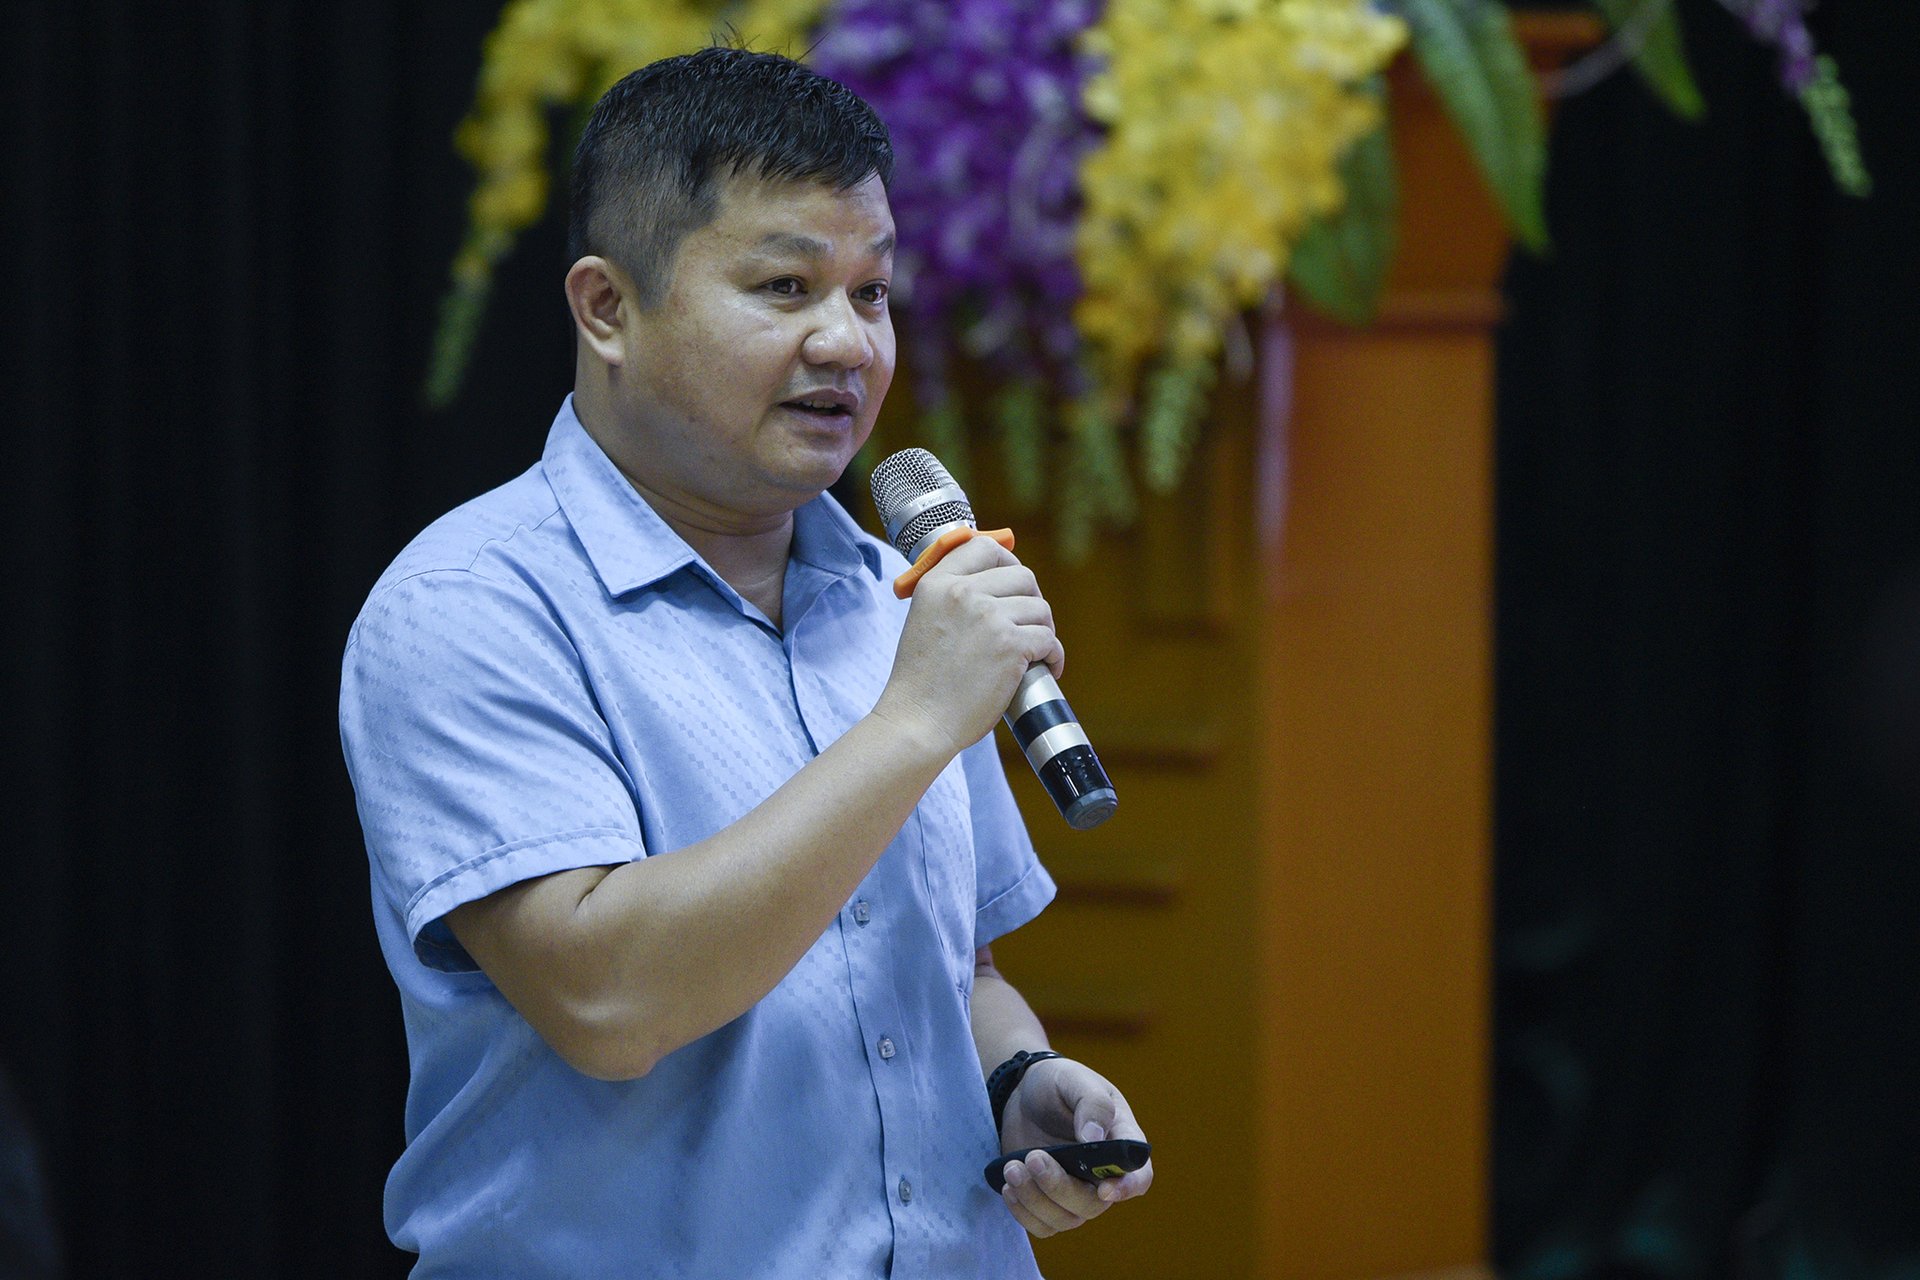 Mr. Bui Dang Phong, Deputy Director of the Office for the Conservation of Endangered Wildlife Project, WWF Vietnam, providing insights on the state of wildlife trafficking activities. Photo: Tung Dinh.